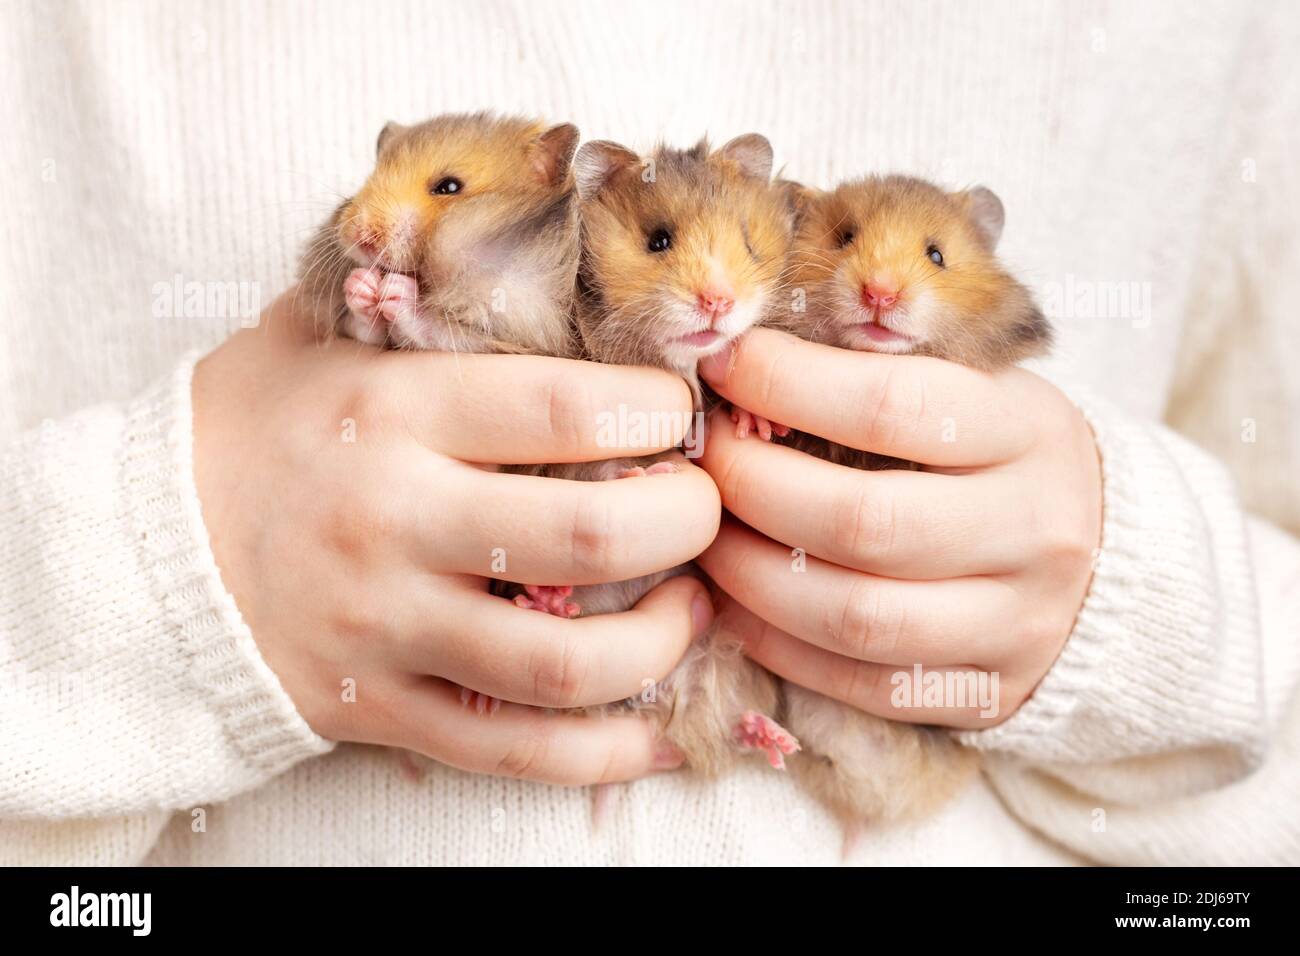 Three cute fluffy golden hamsters in the hands of a child on a light background. Triplets. Pet care concept. Stock Photo